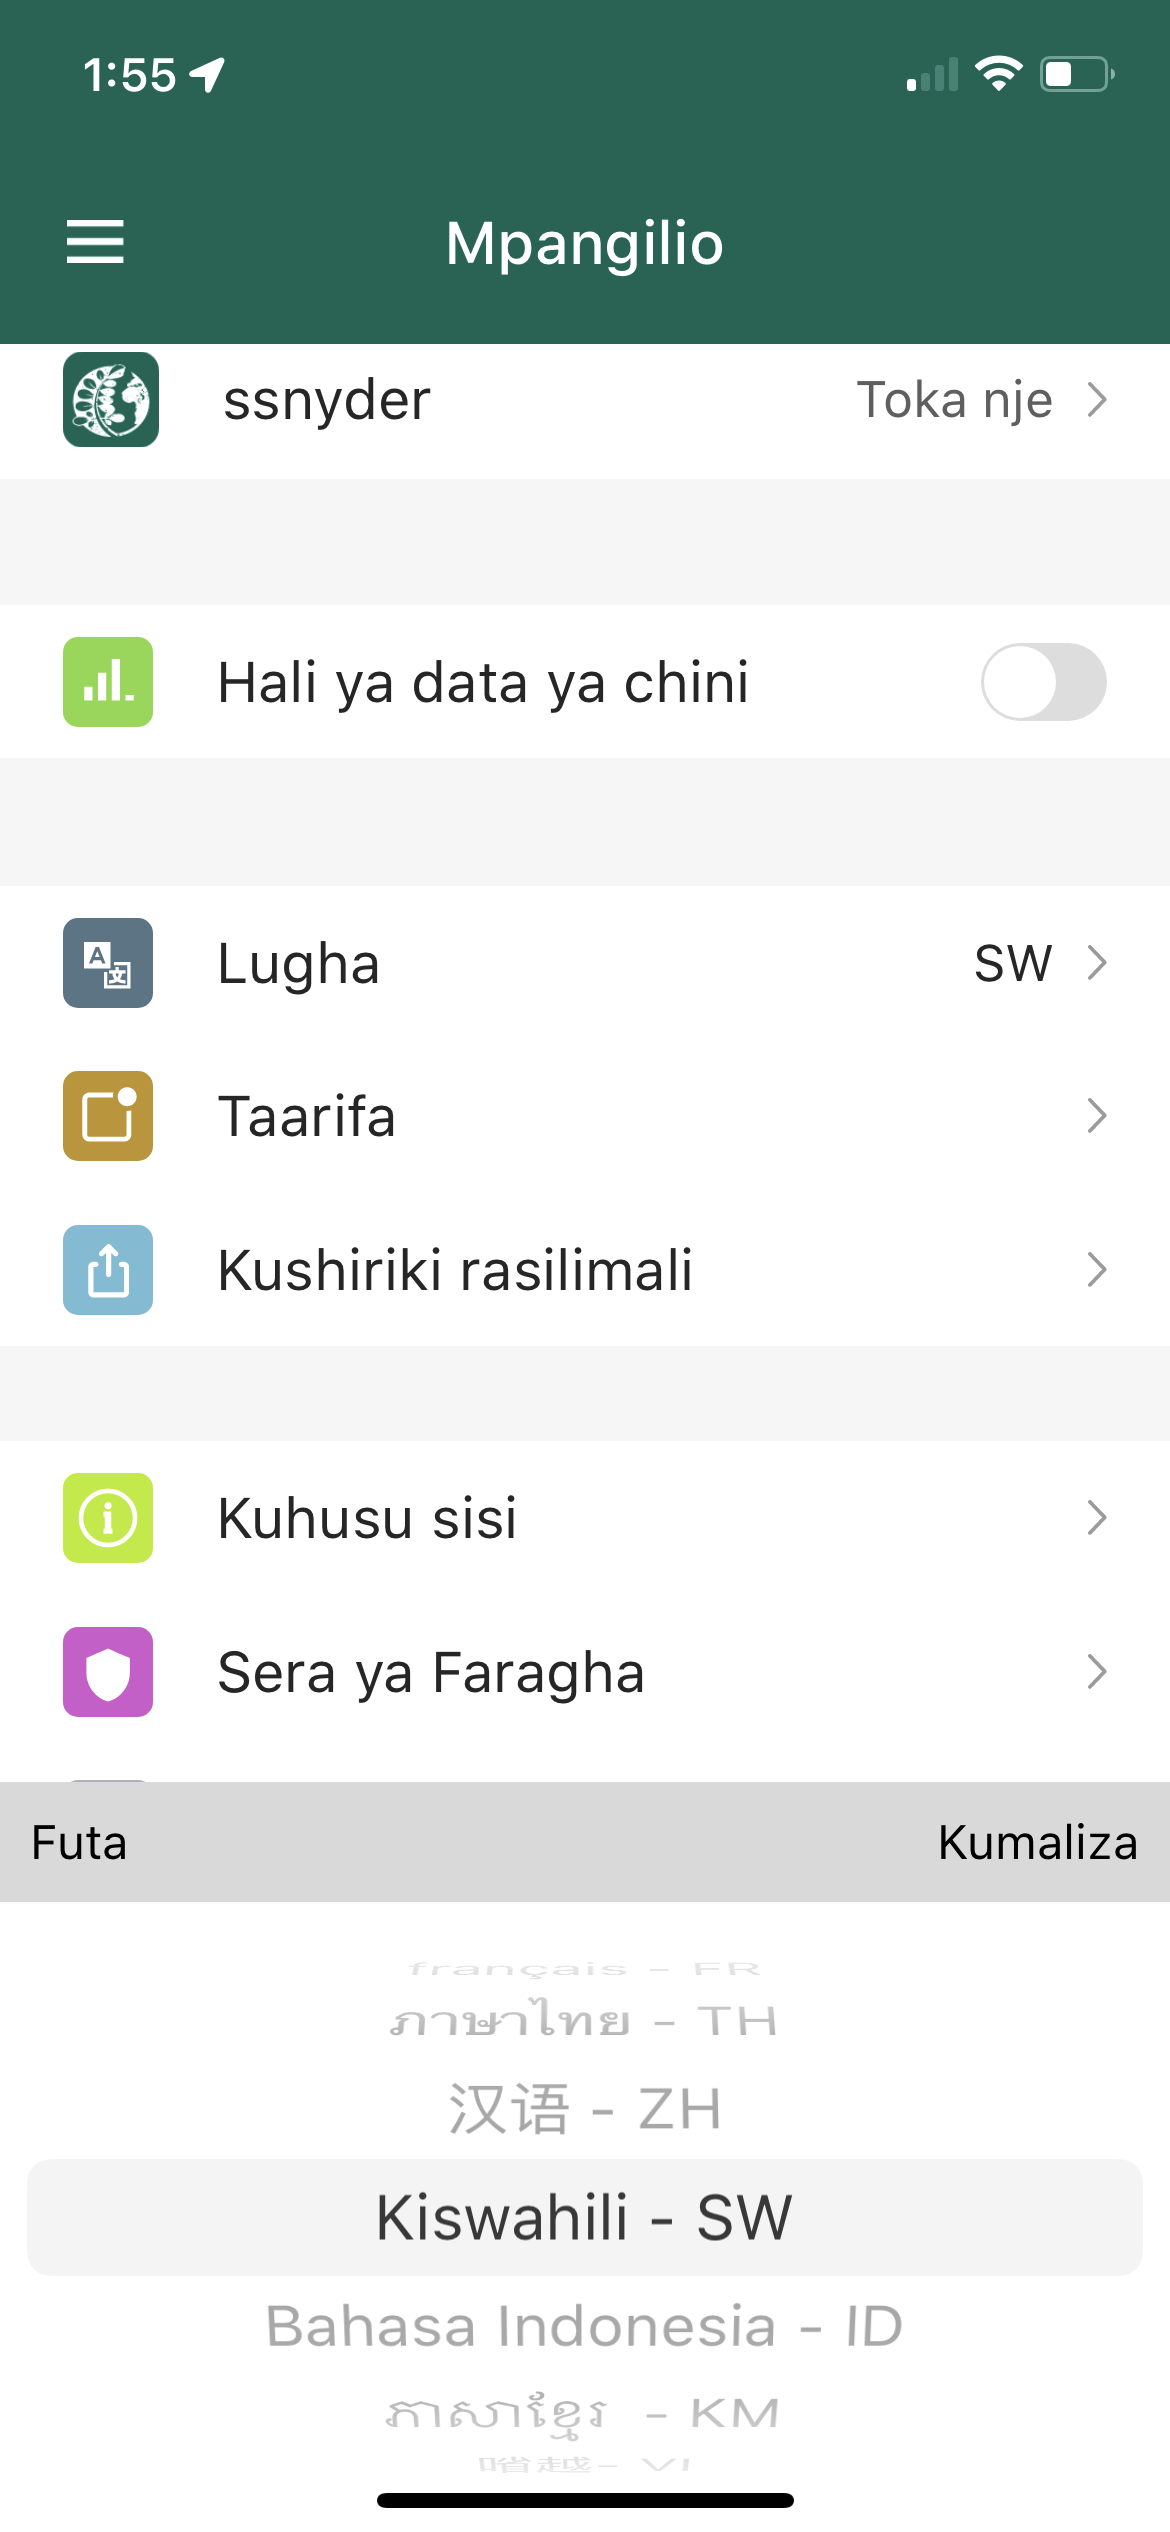 ECHOcommunity Mobile App Now Available in 11 Languages